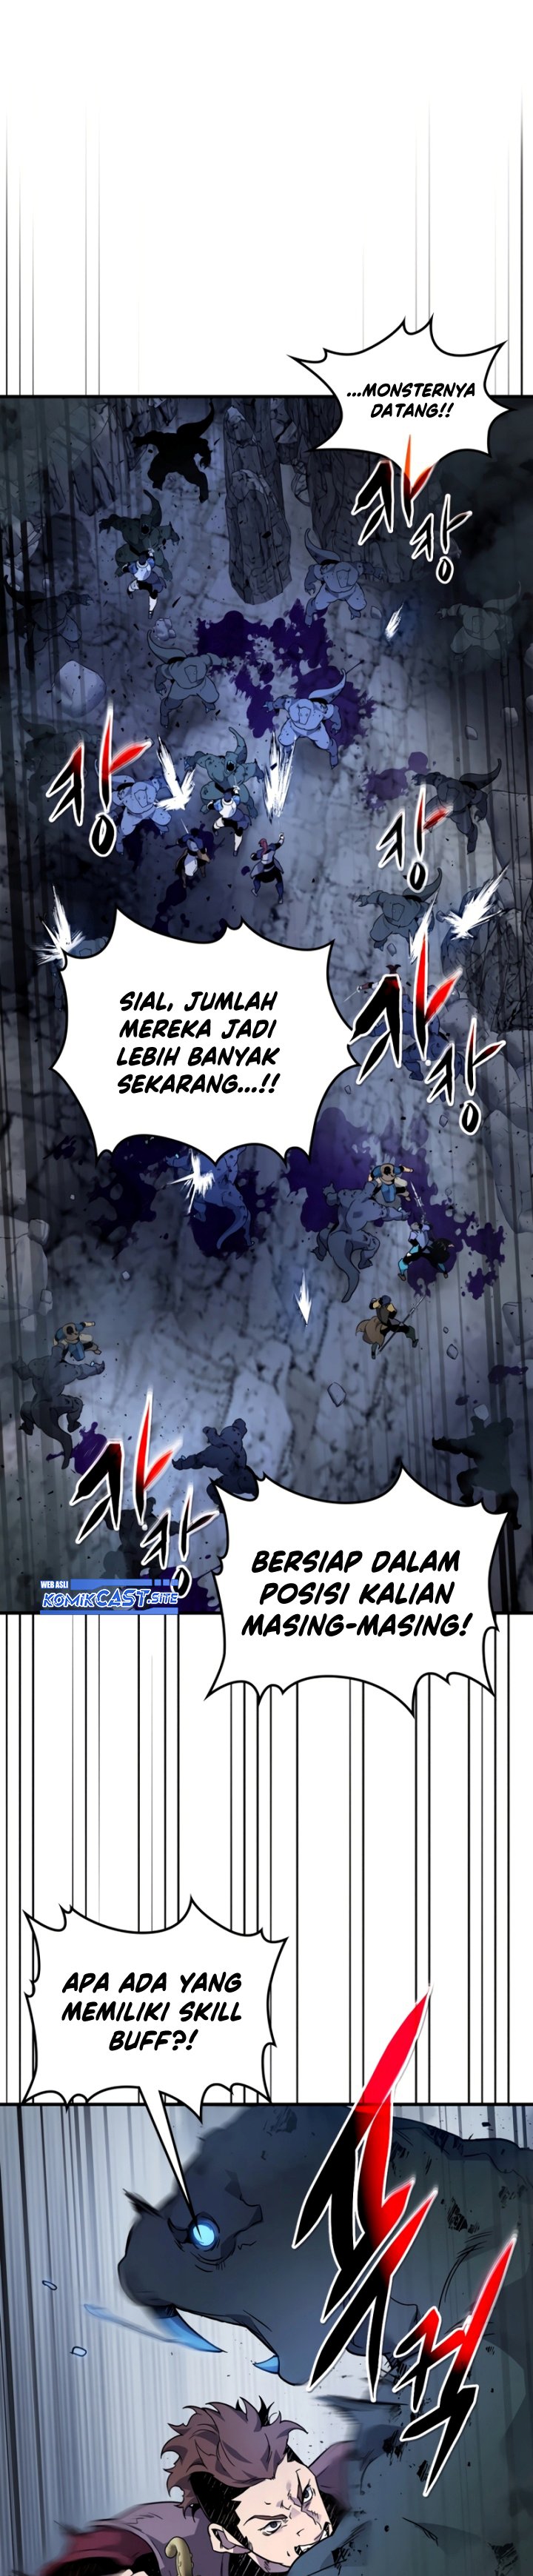 Leveling With The Gods Chapter 80